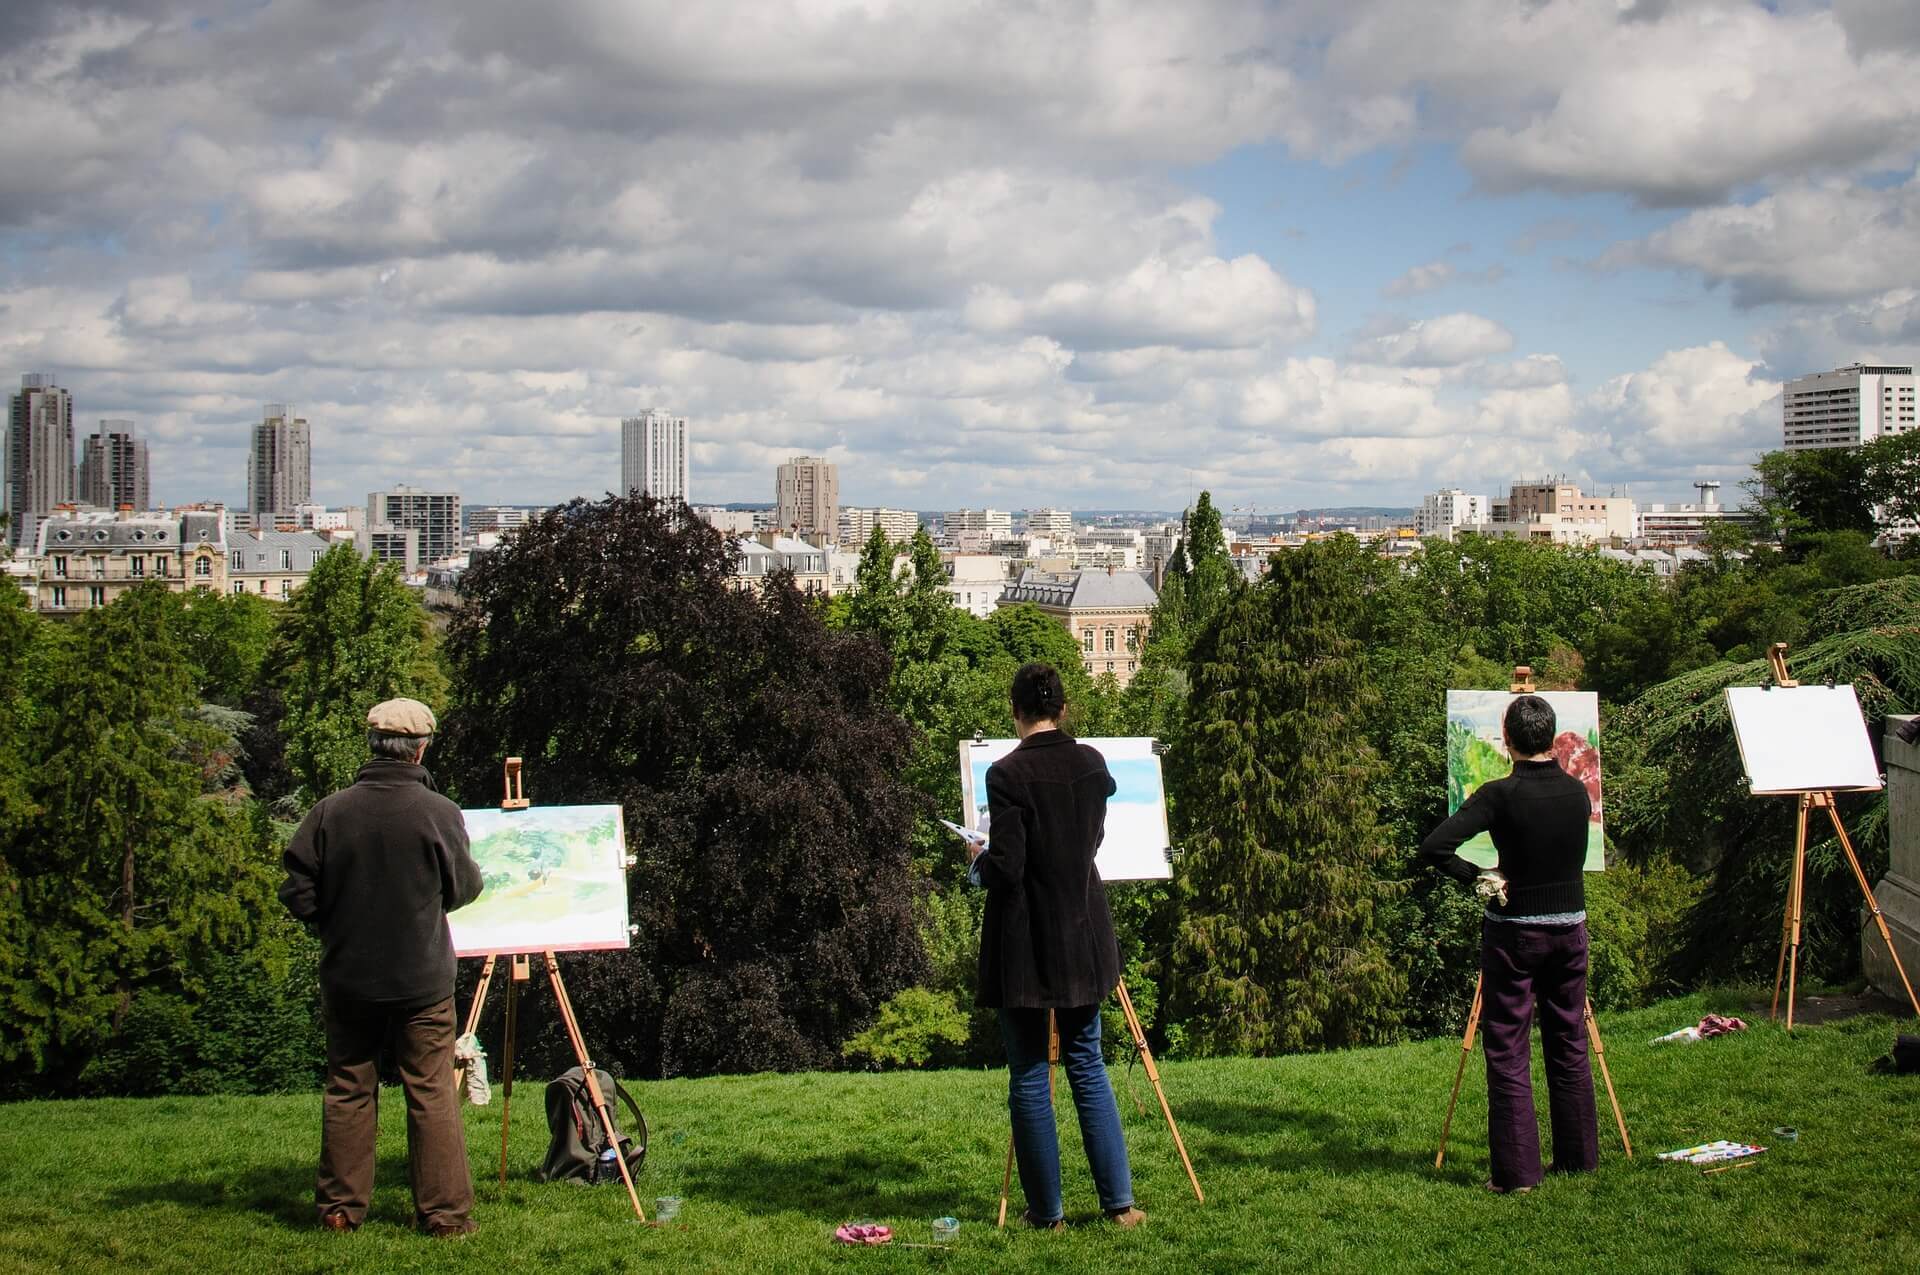 Buttes-Chaumont Park - A beautiful outdoor place to visit in Paris